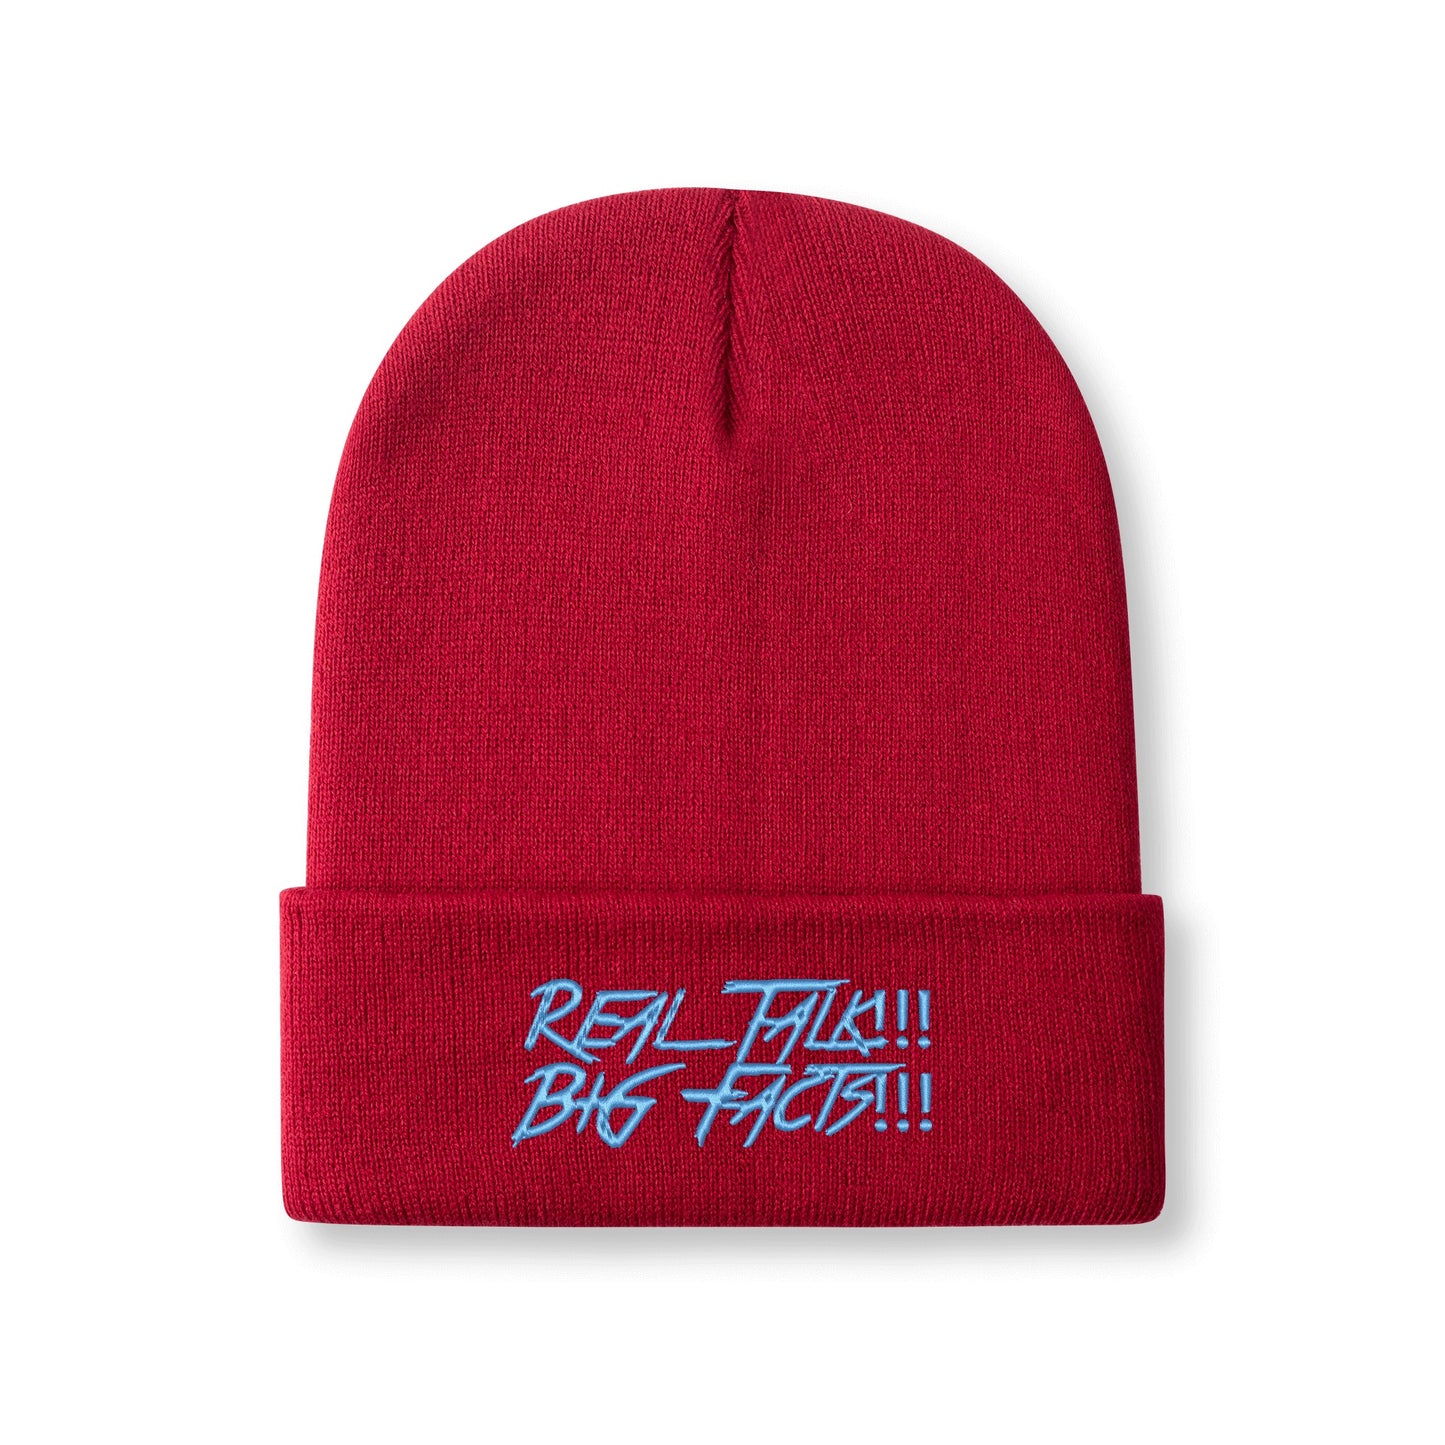 REAL TALK!!! BIG FACTS!!! Embroidered Knitted Hat